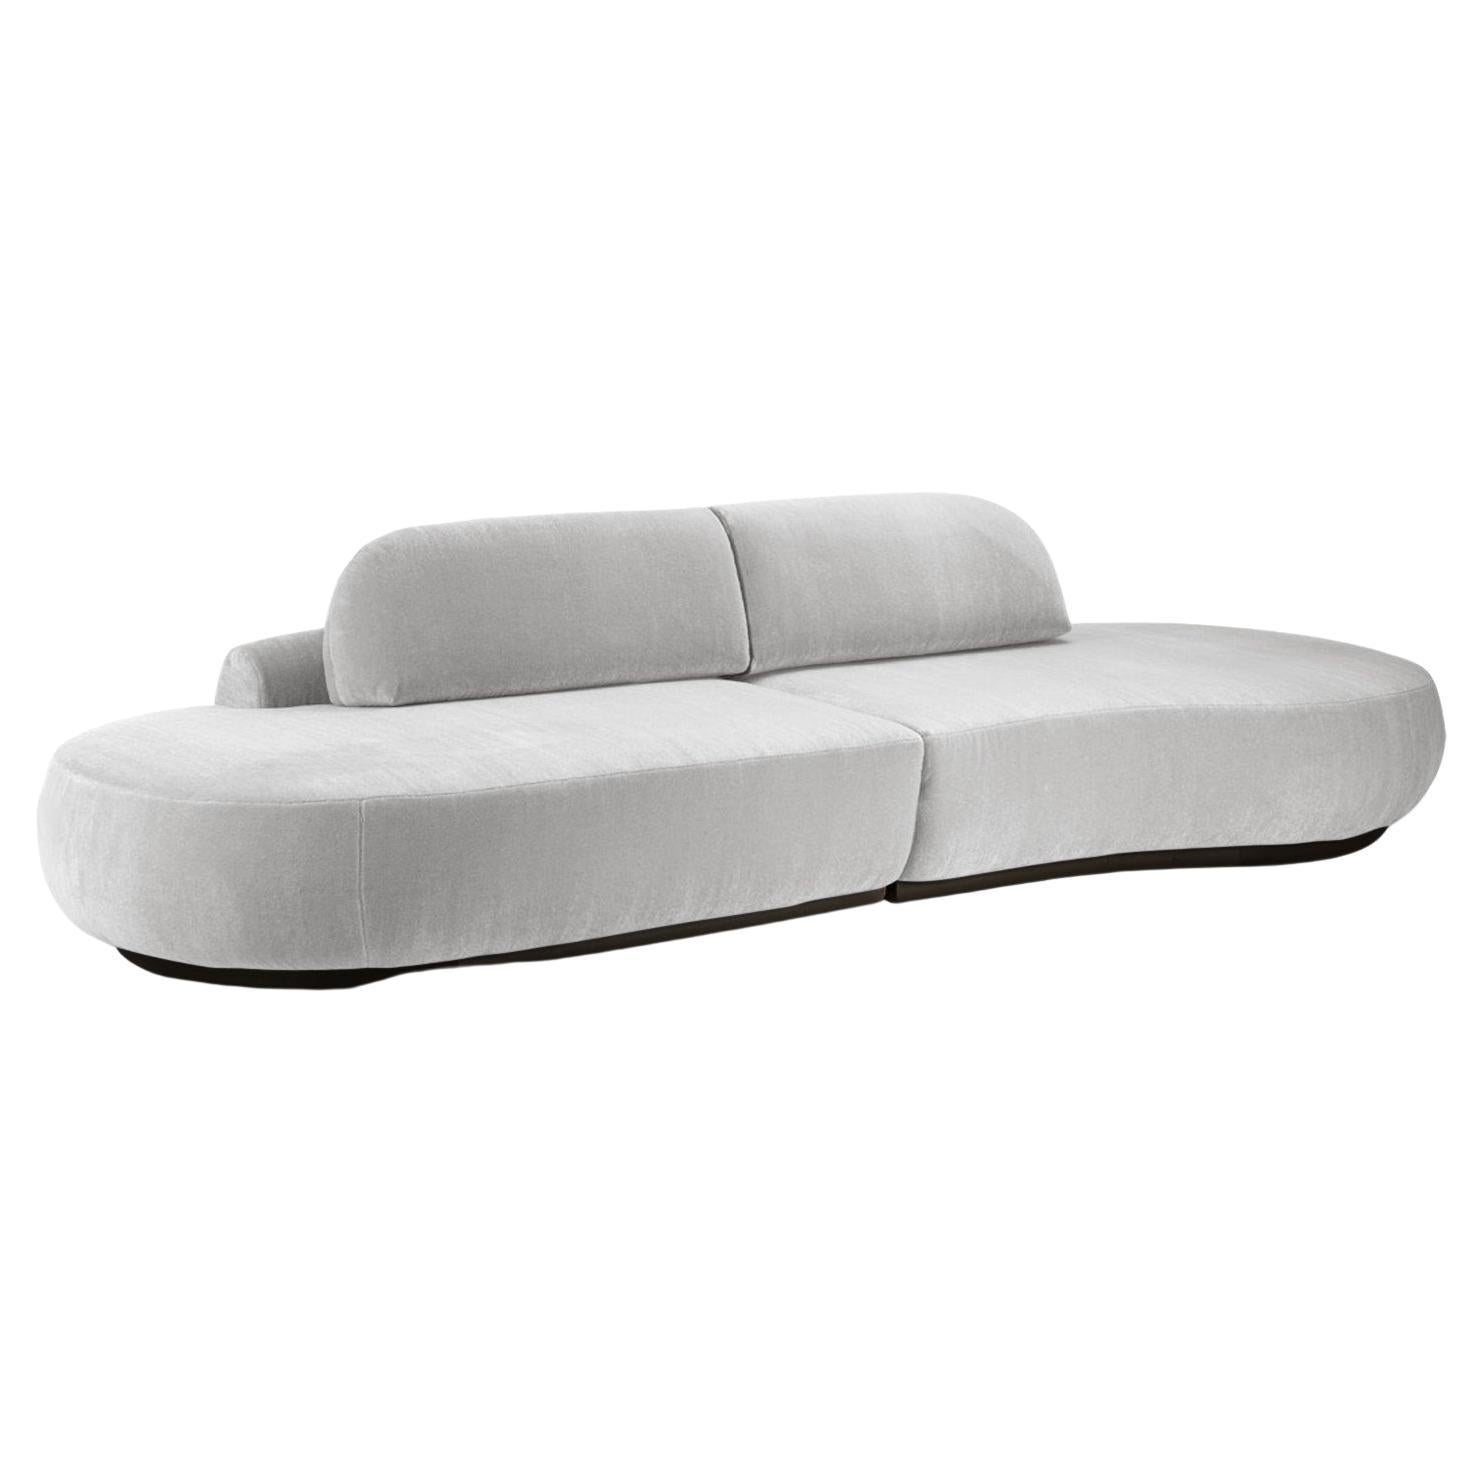 Naked Curved Sectional Sofa, 2 Piece with Beech Ash-056-5 and Aluminium